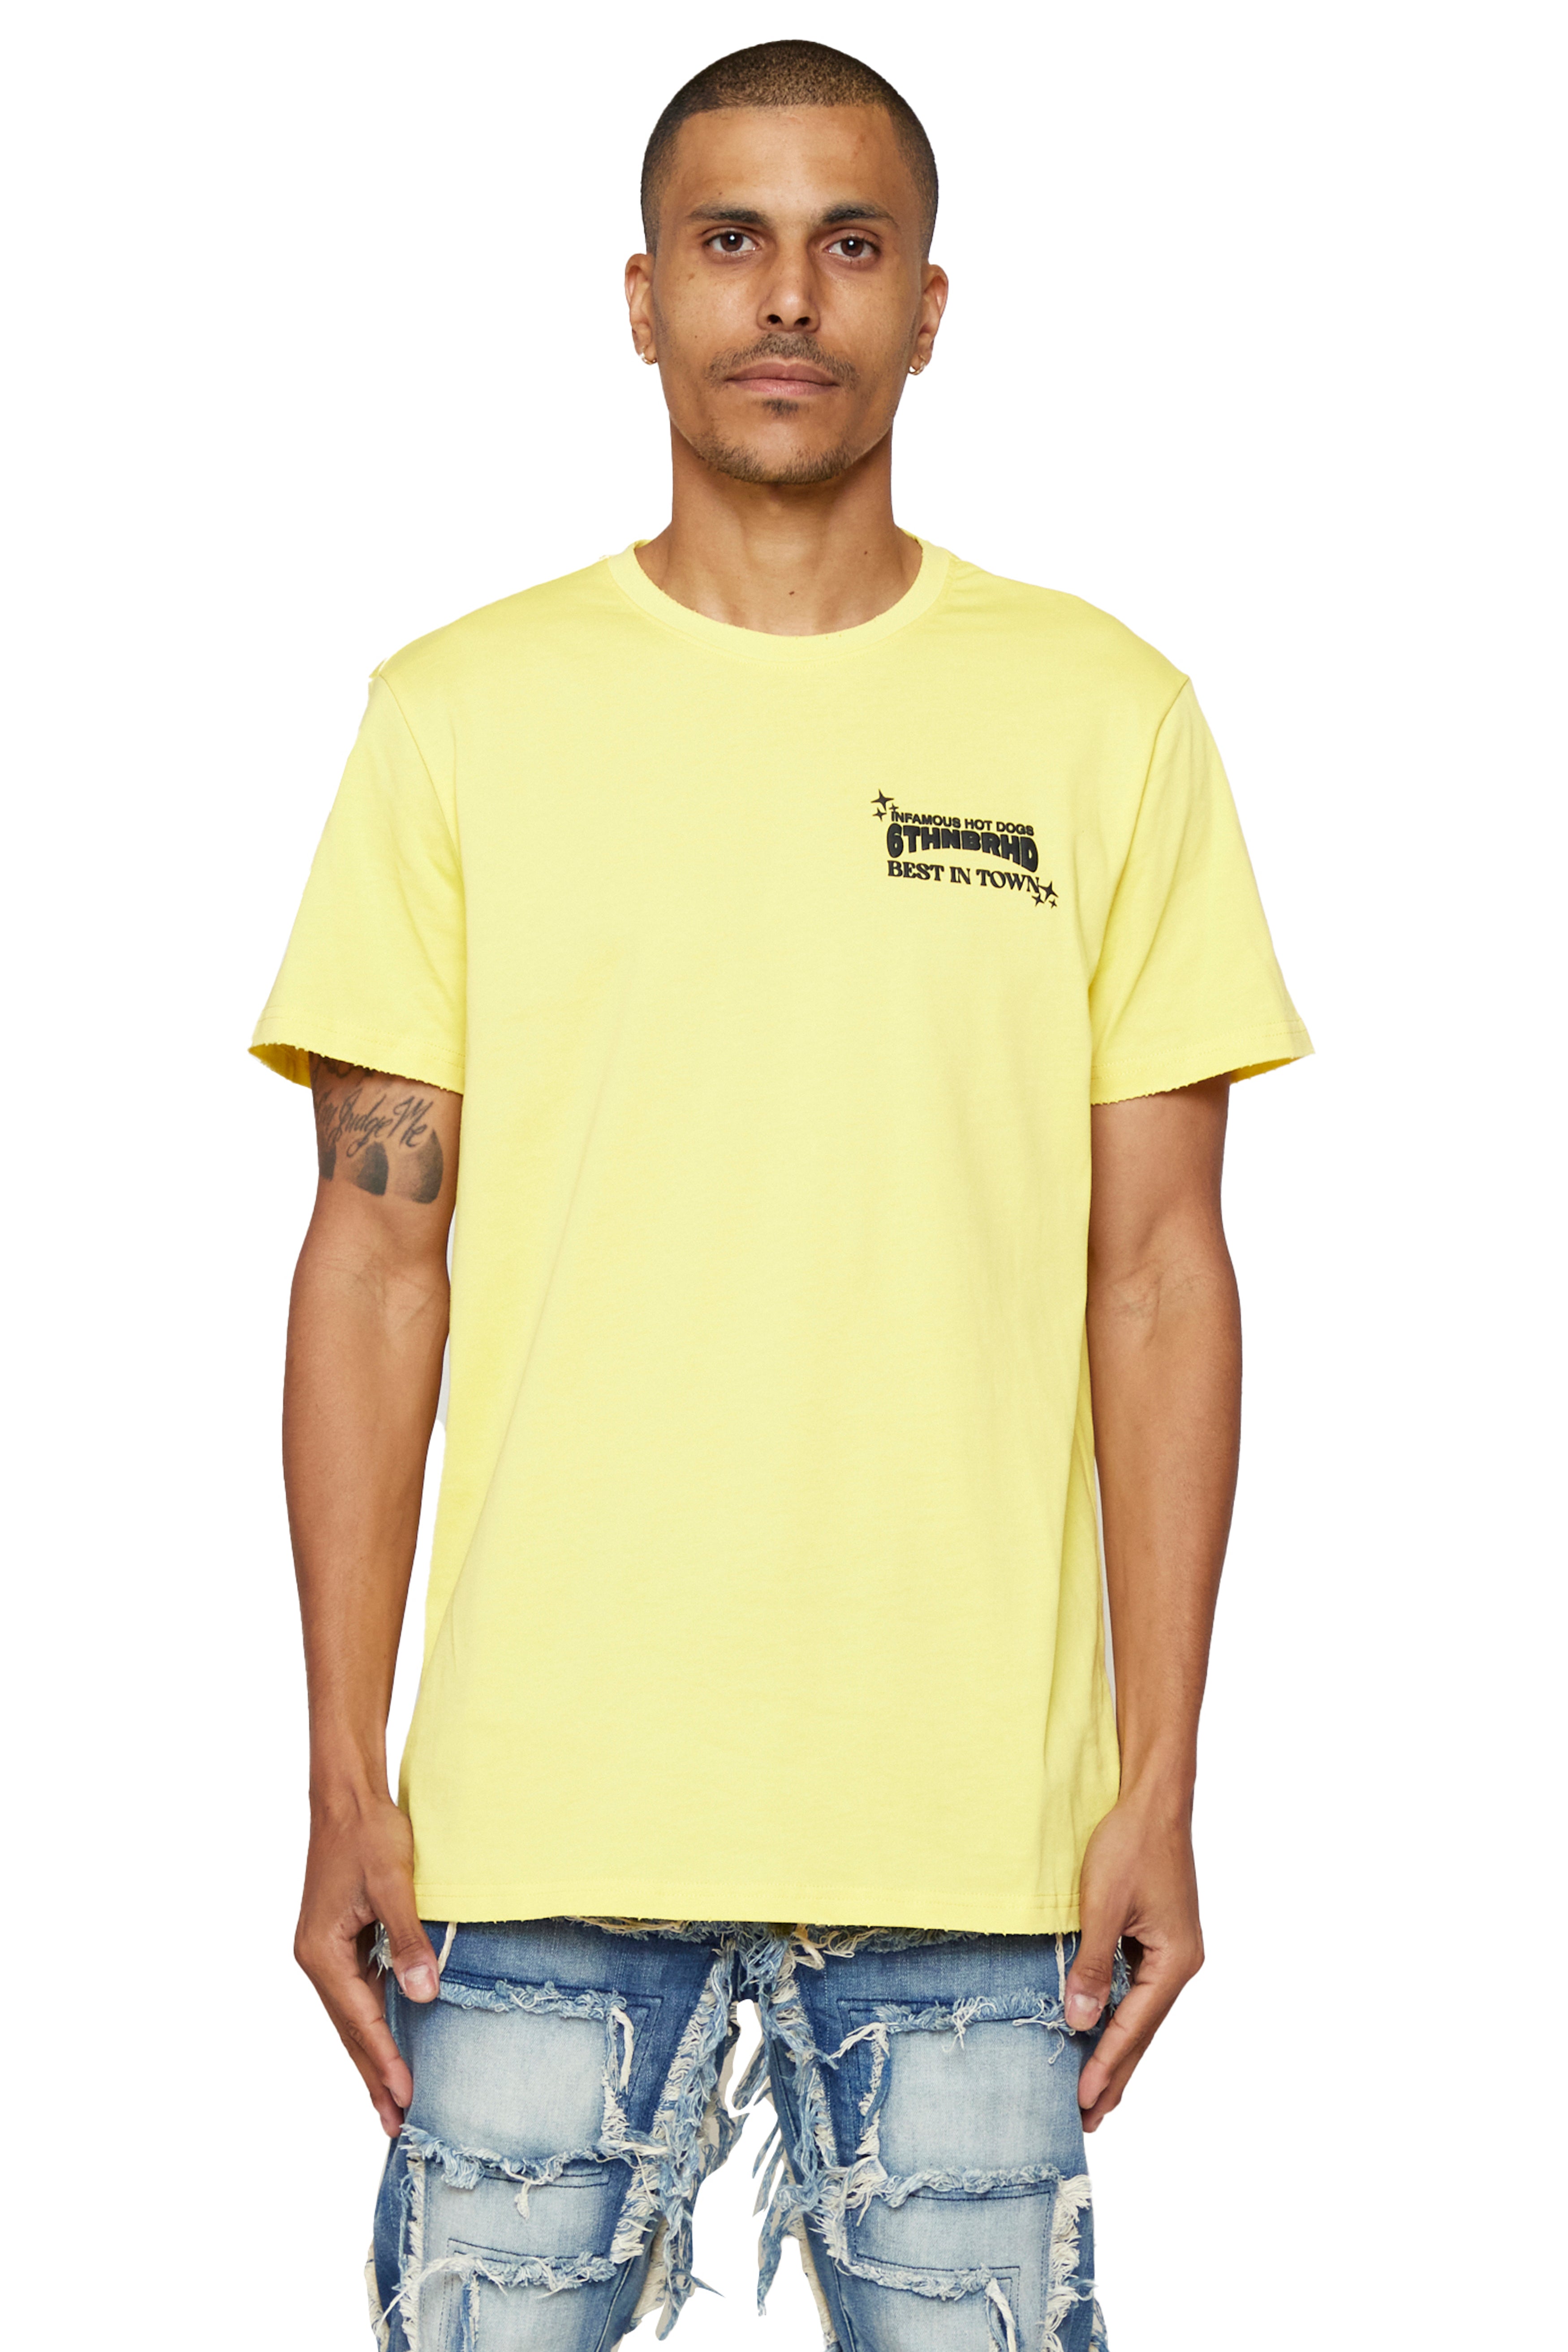 6thNBRHD TEE "INFAMOUS HOT DOGS"- VINTAGE YELLOW